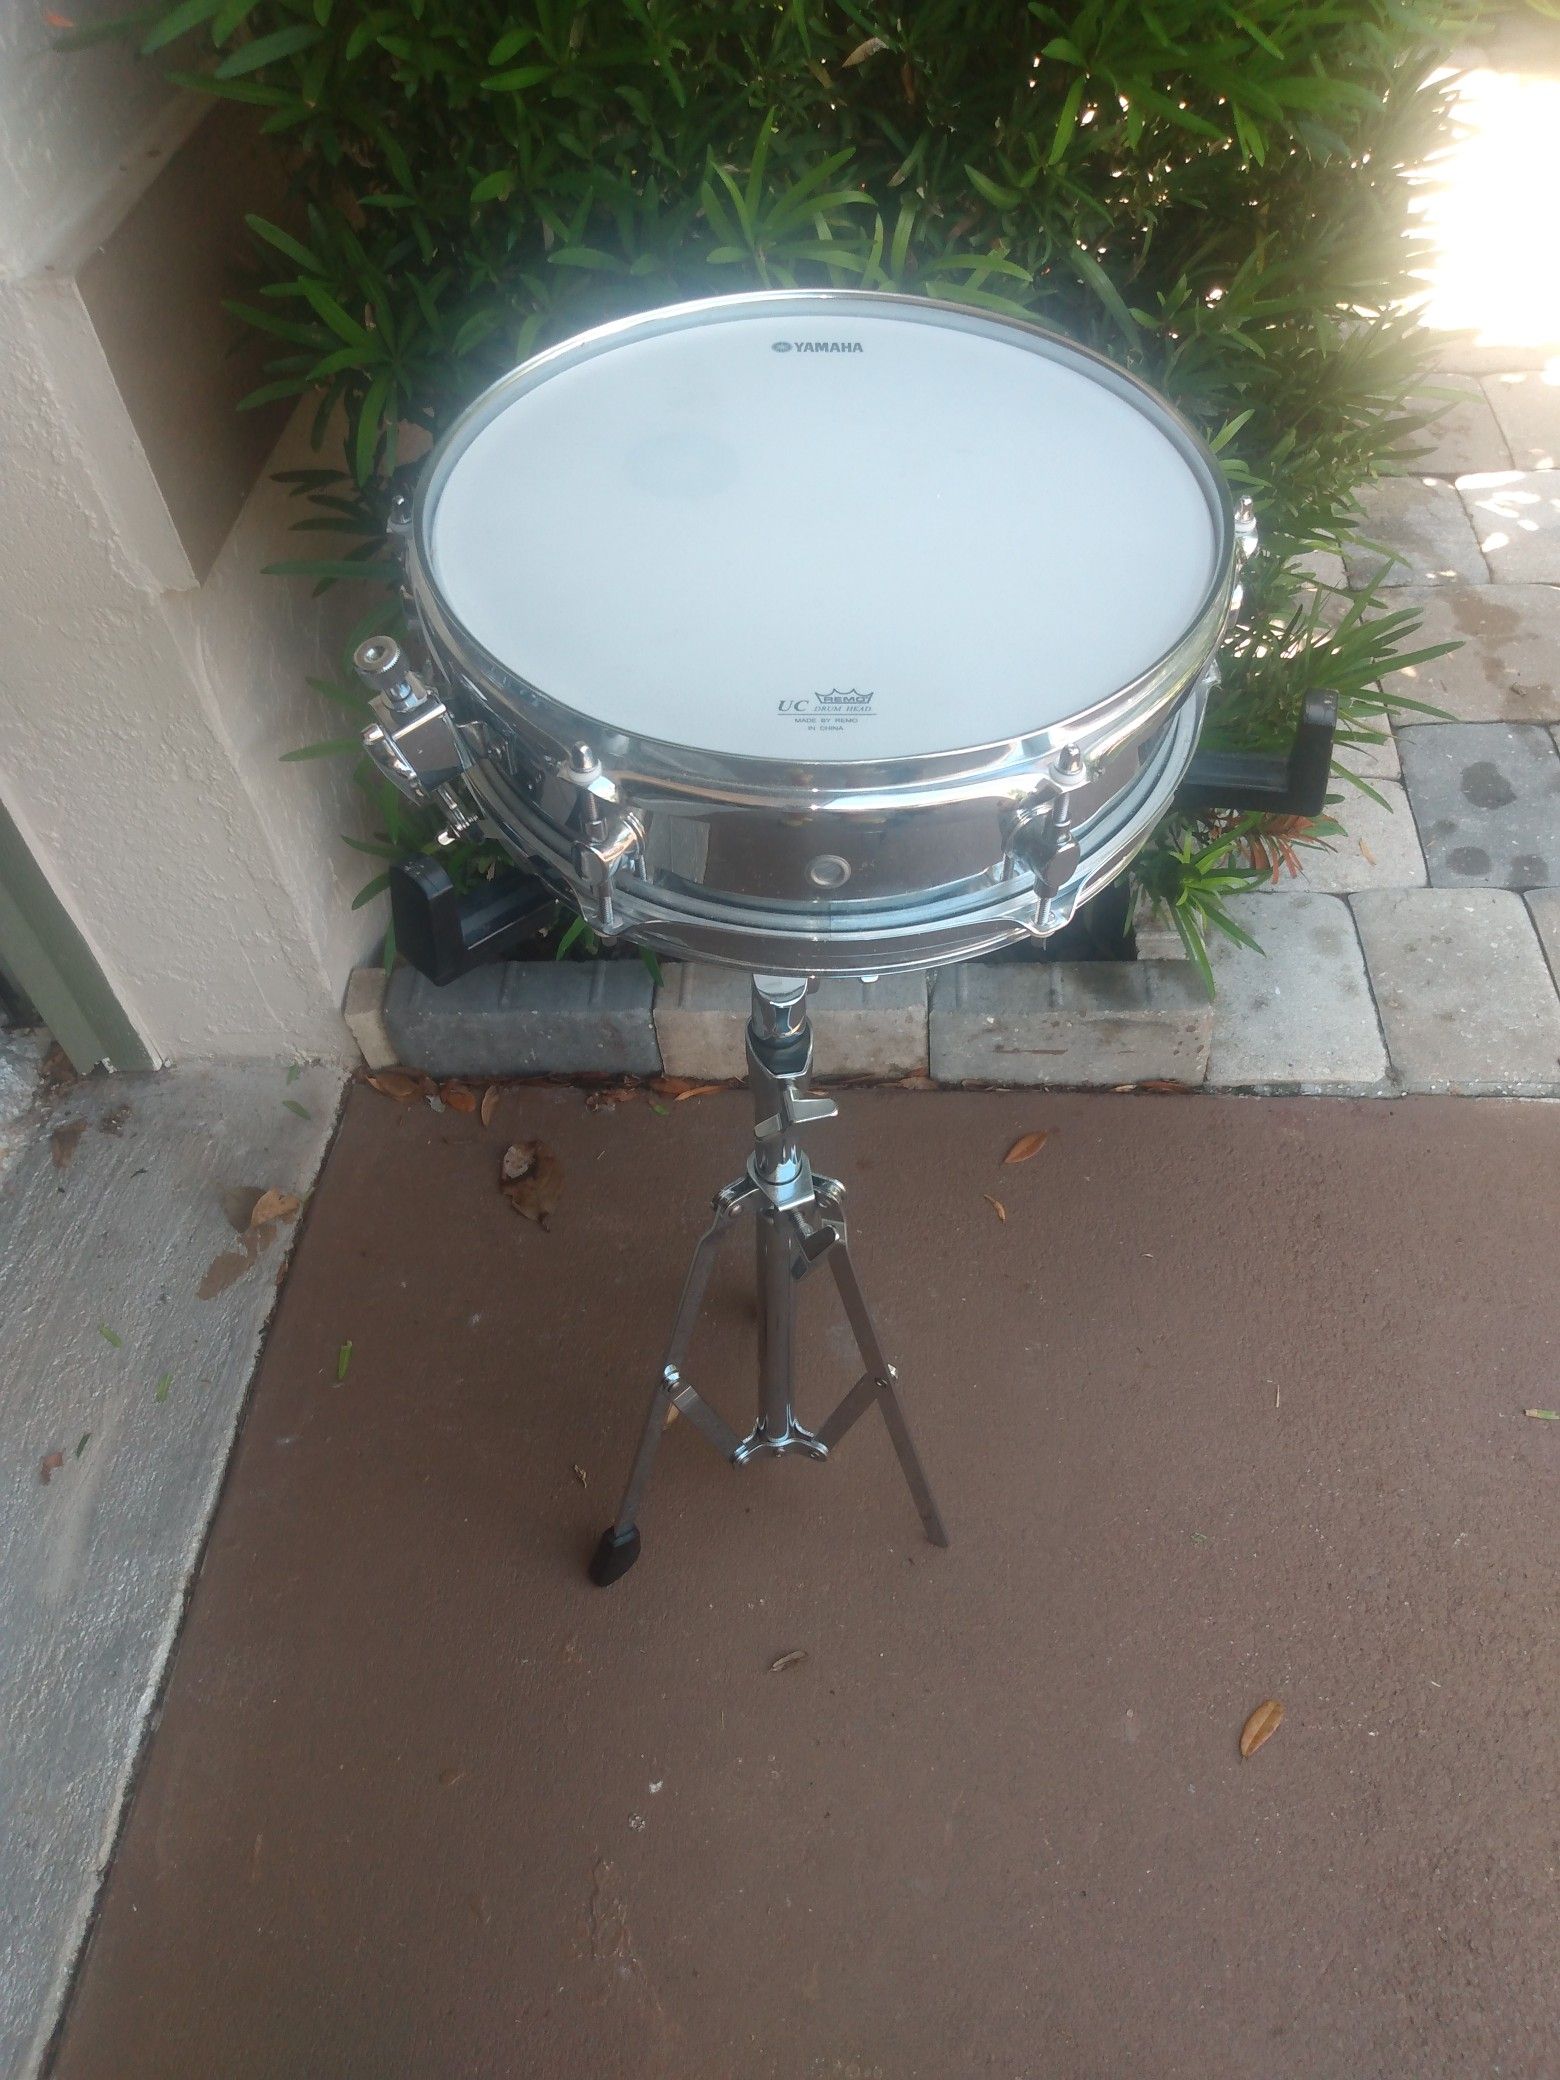 Yamaha snare drum set with carrying bags